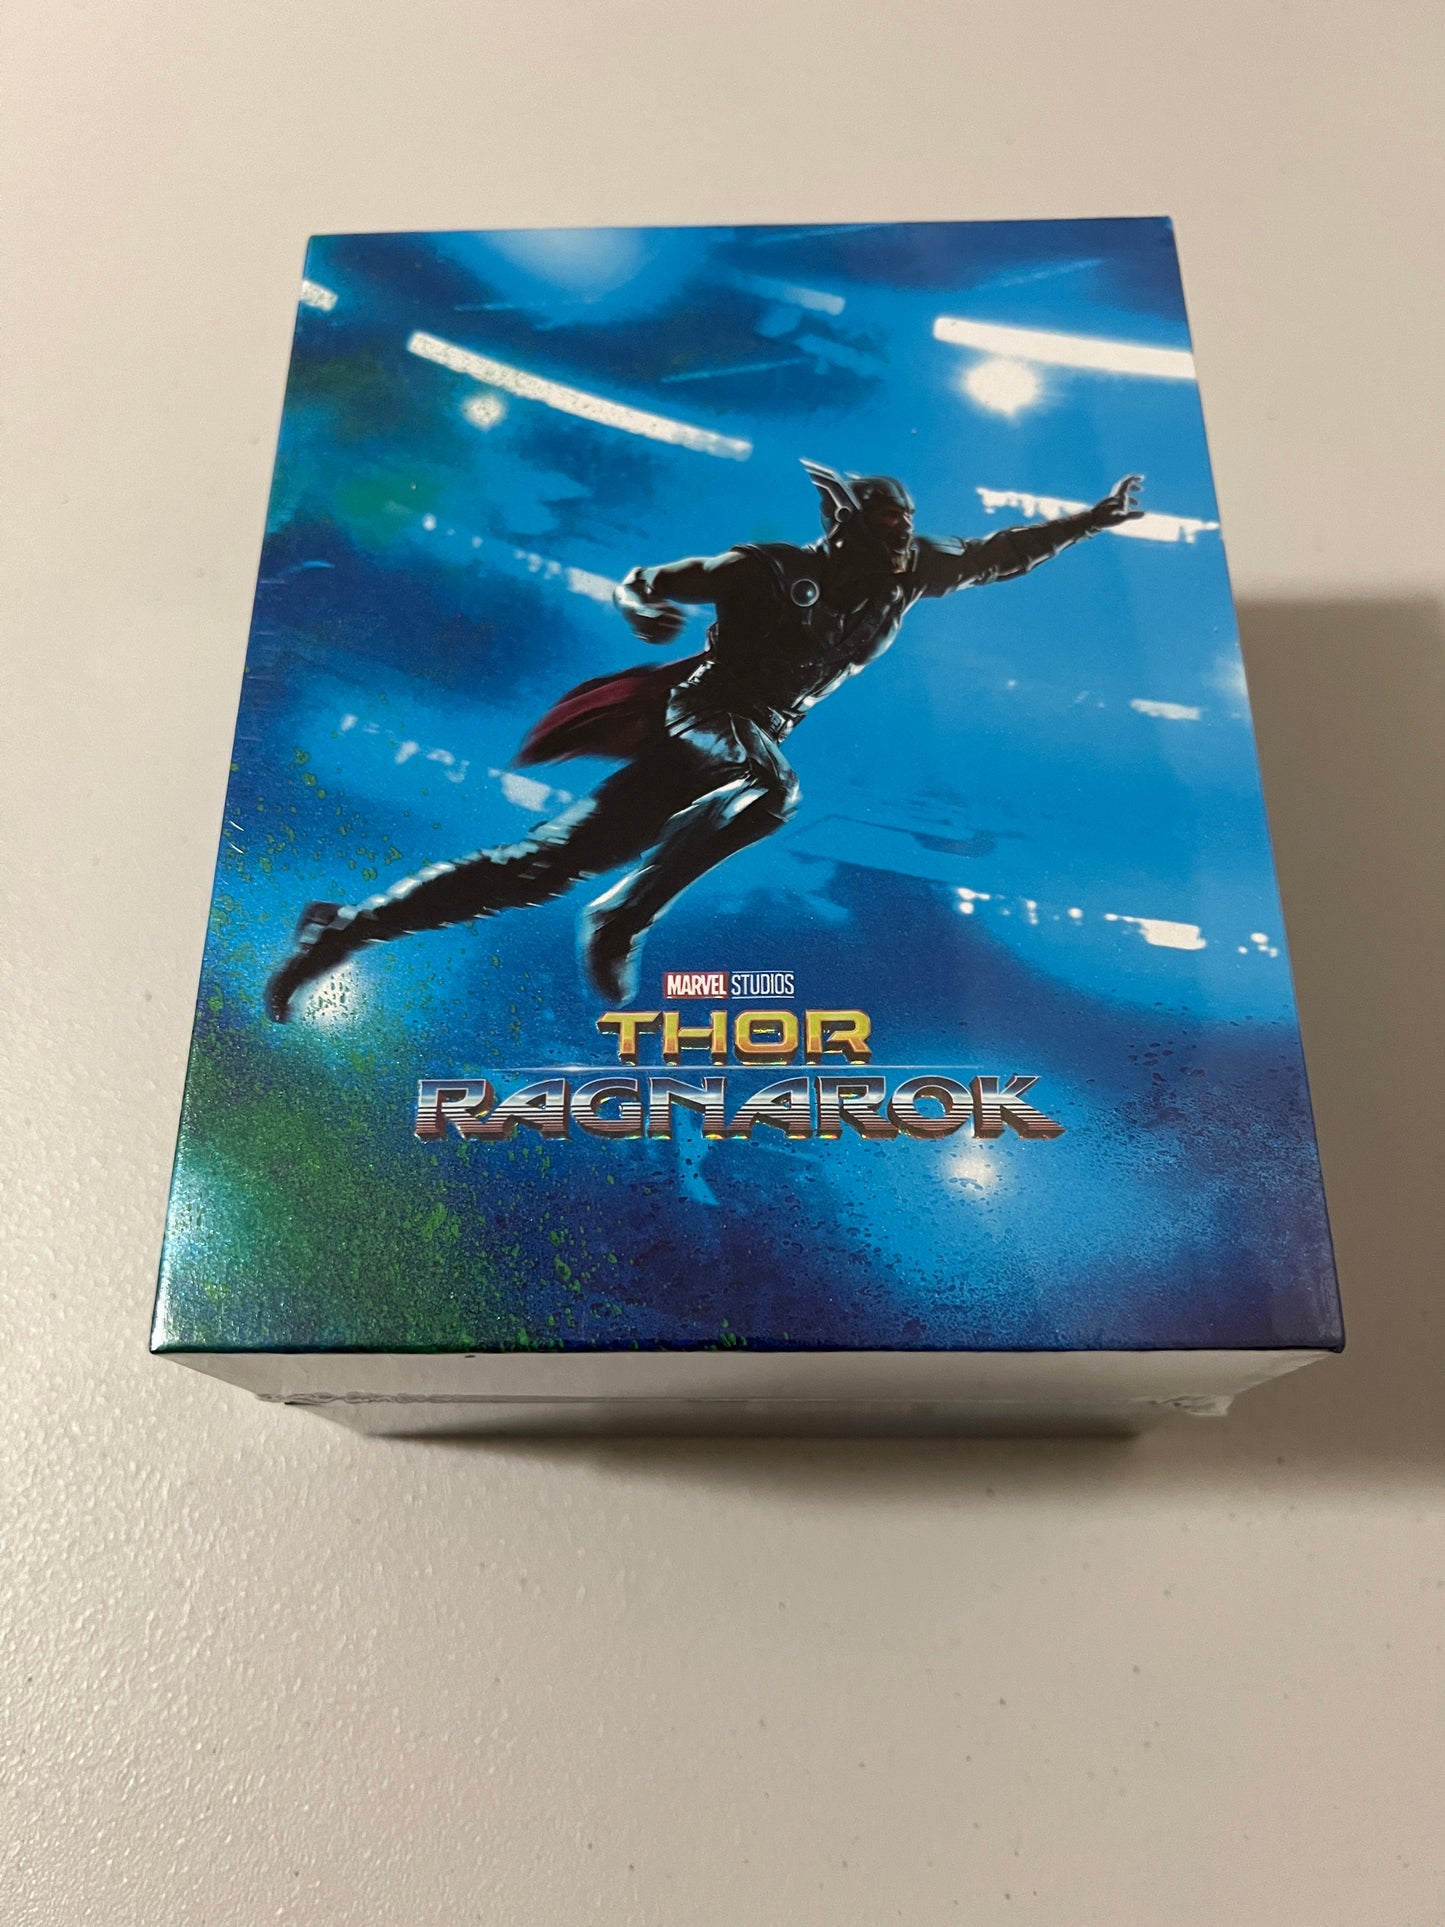 Thor Ragnarok (4K+3D+2D Blu-ray SteelBook) (WeET Collection Exclusive No.12) One Click Box Set